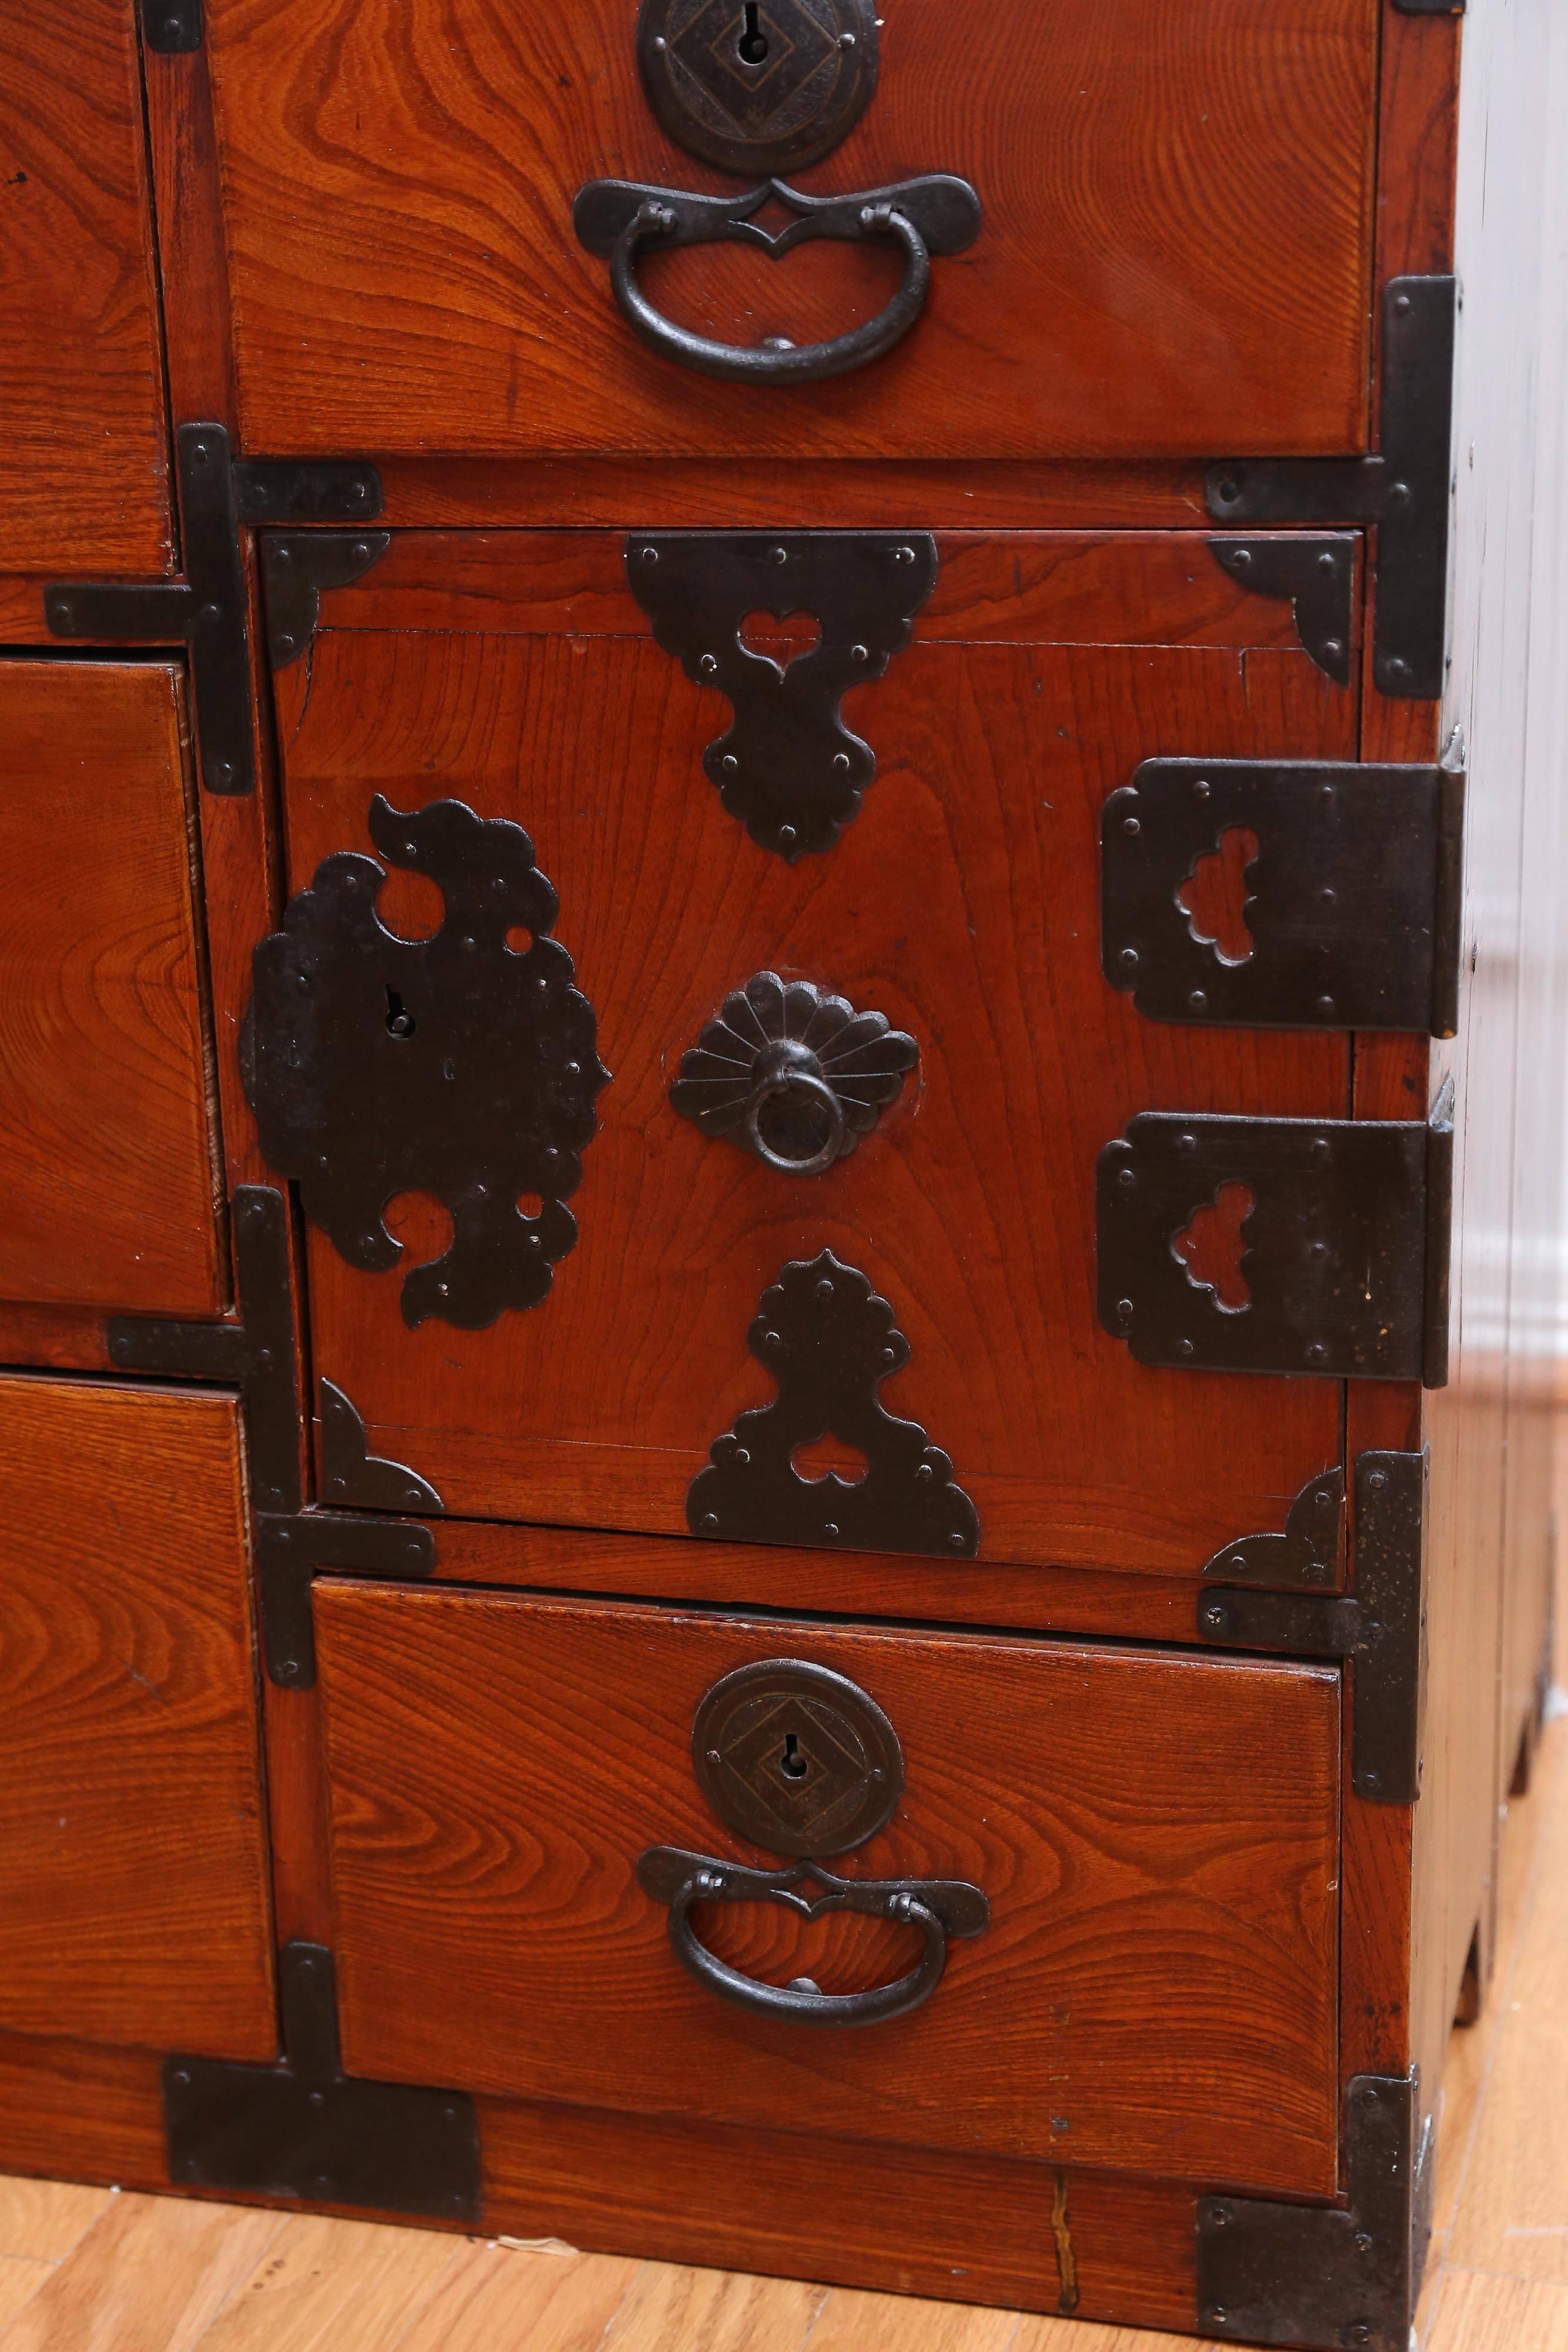 Early Meiji period Keyaki and cypress wood isho-Dansu Traditional tansu chest.
These chests were made for clothing storage and has eight compatments, which is typical.
  